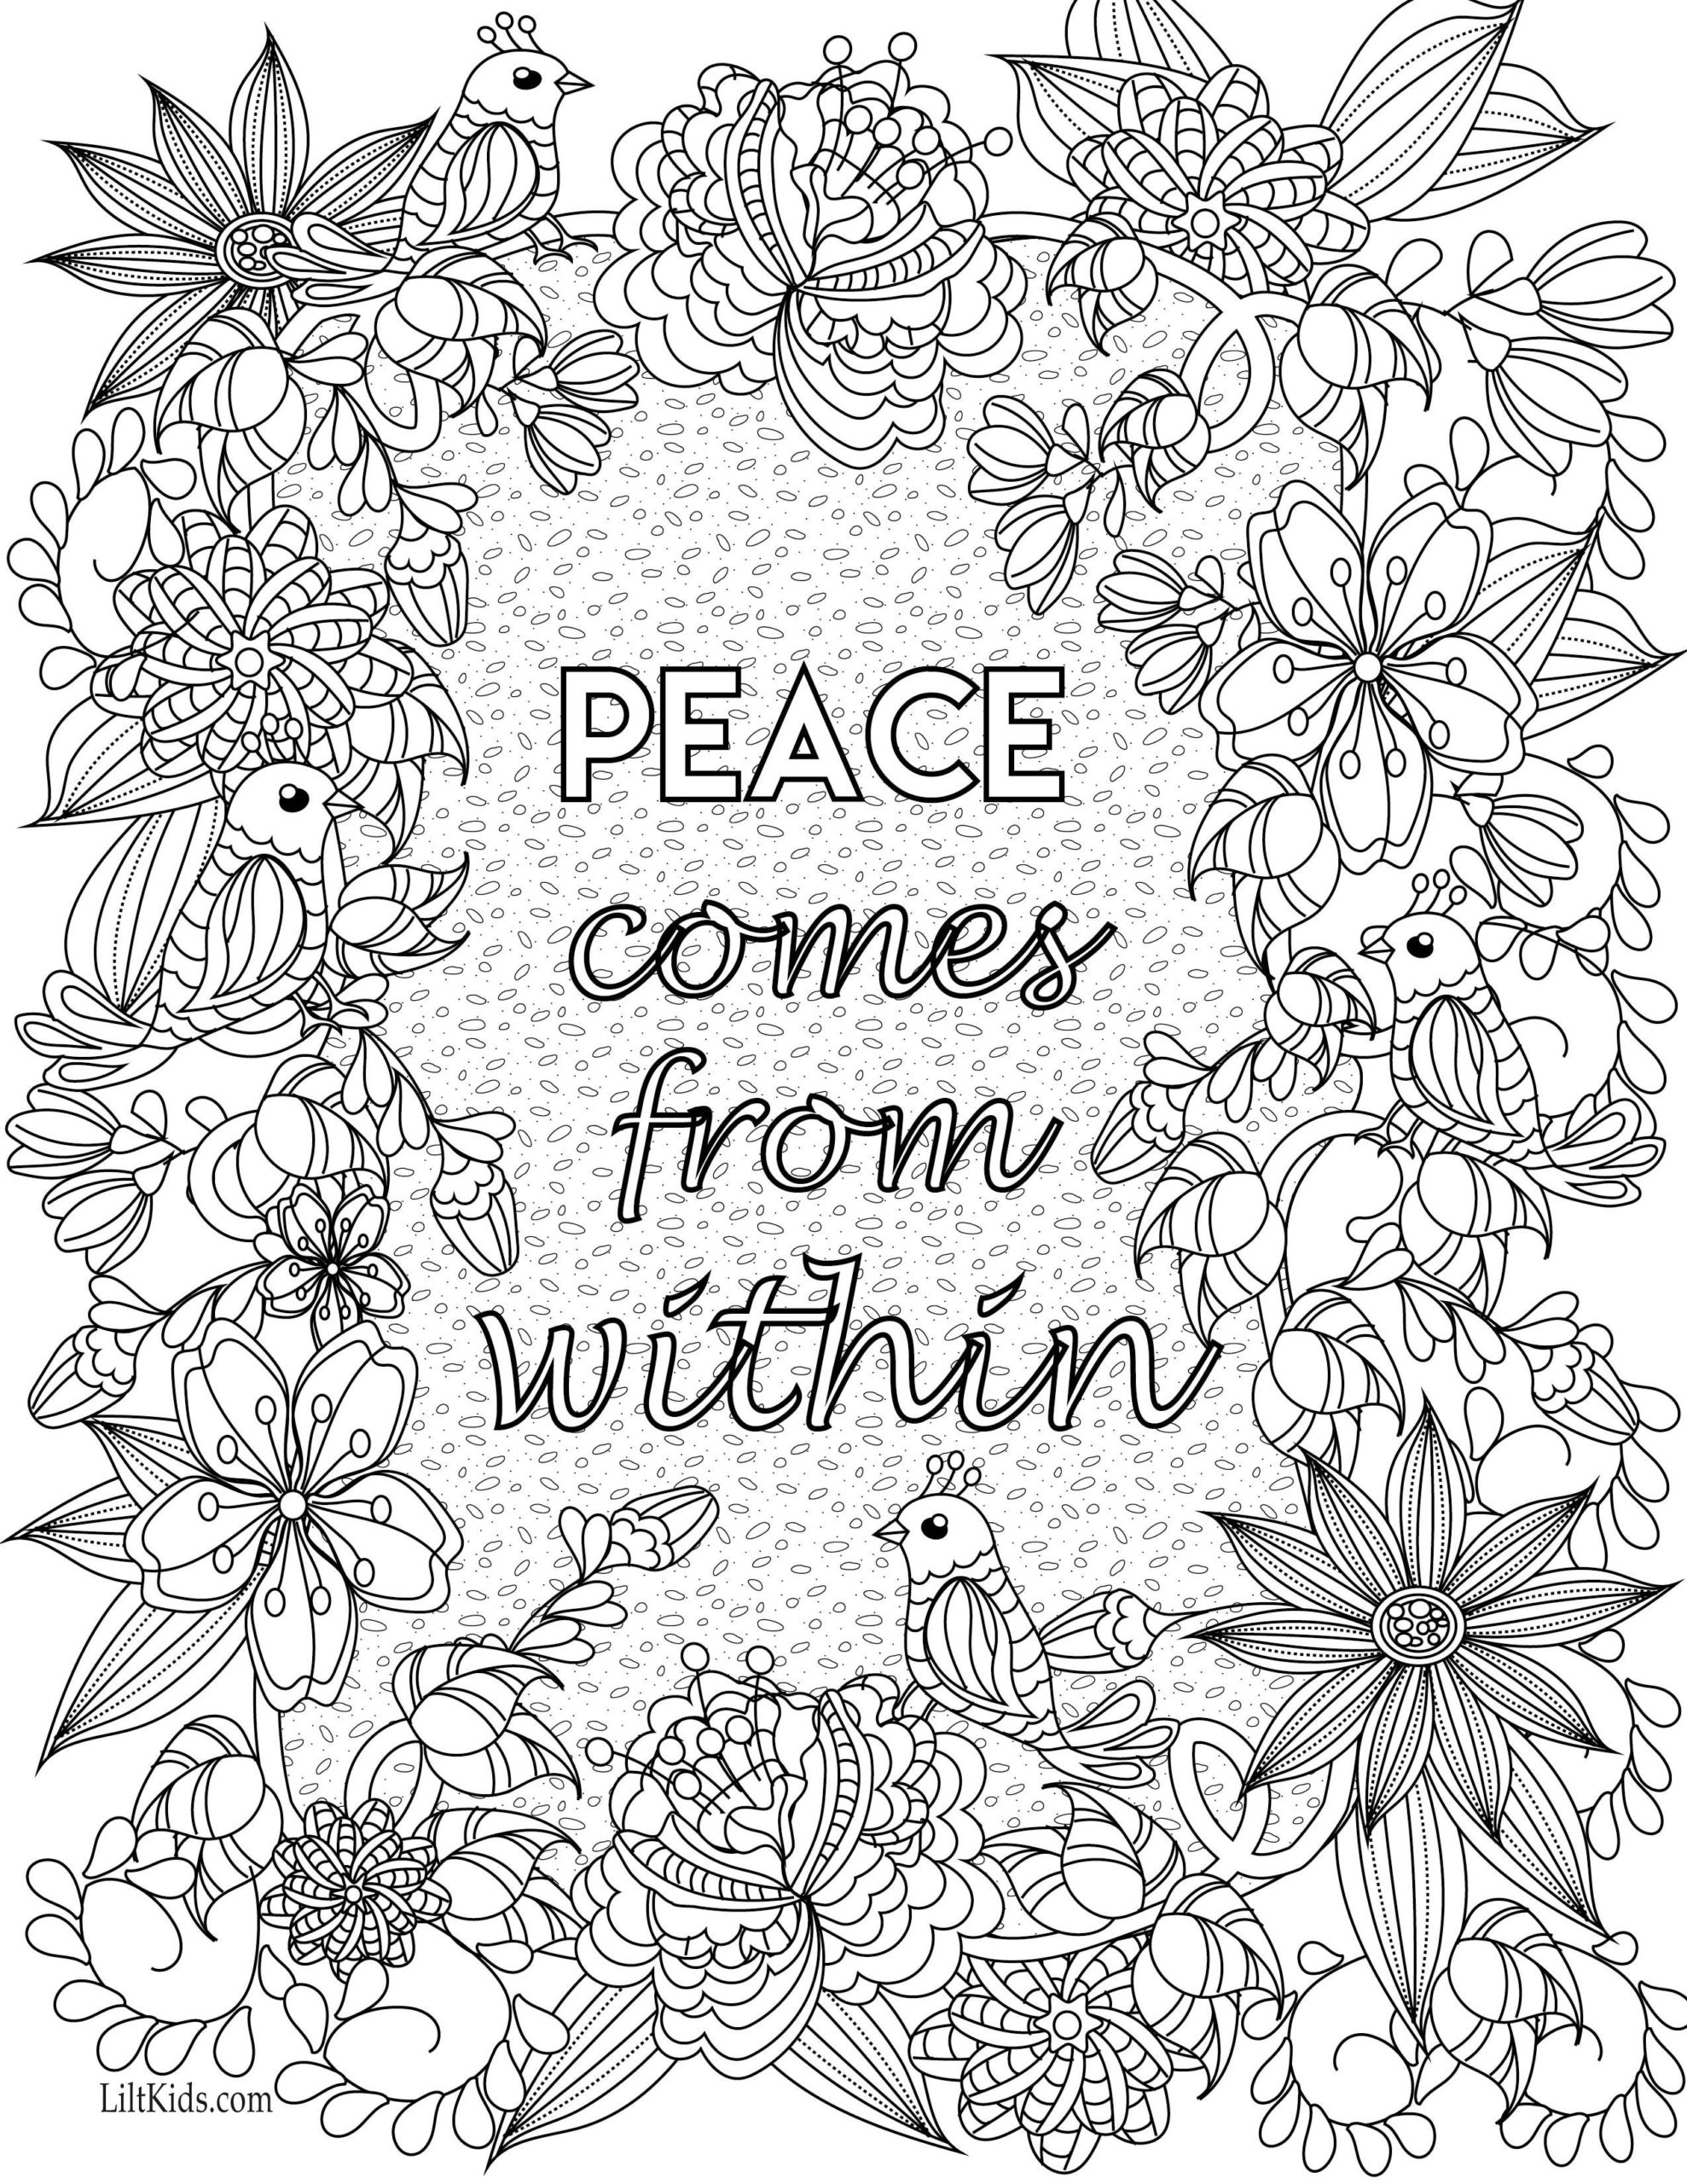 Coloring Book : Breathtaking Free Printable Adult Coloring ...